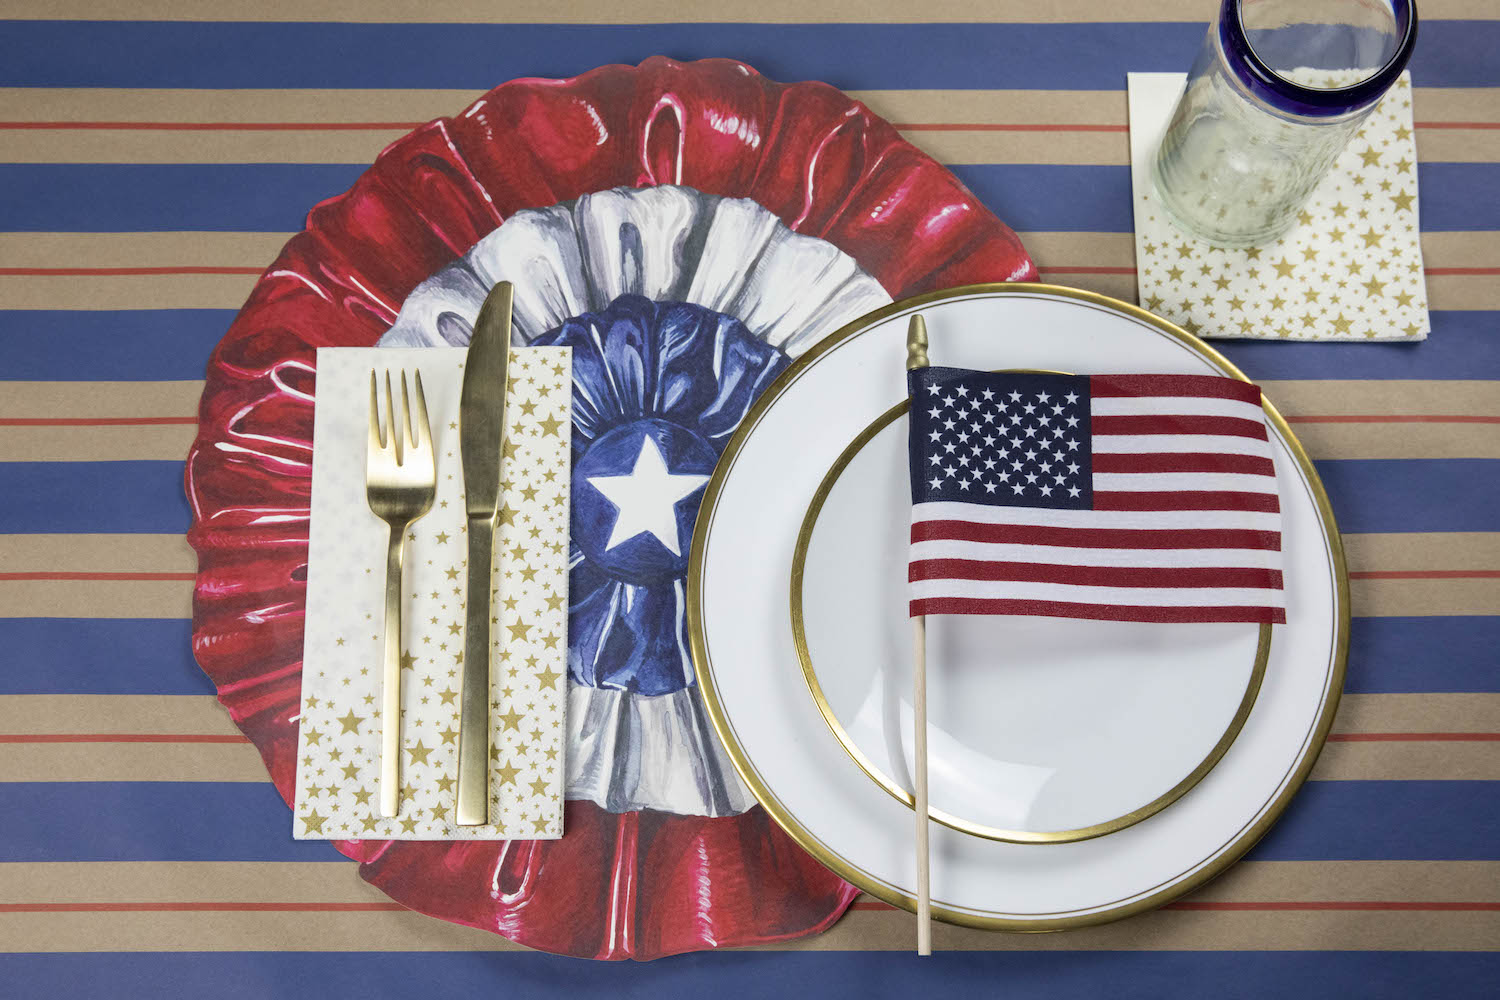 A patriotic place-setting with a Shining Star Guest Napkin with a gold fork and knife next to the plate, and a Shining Star Cocktail Napkin under the glass.